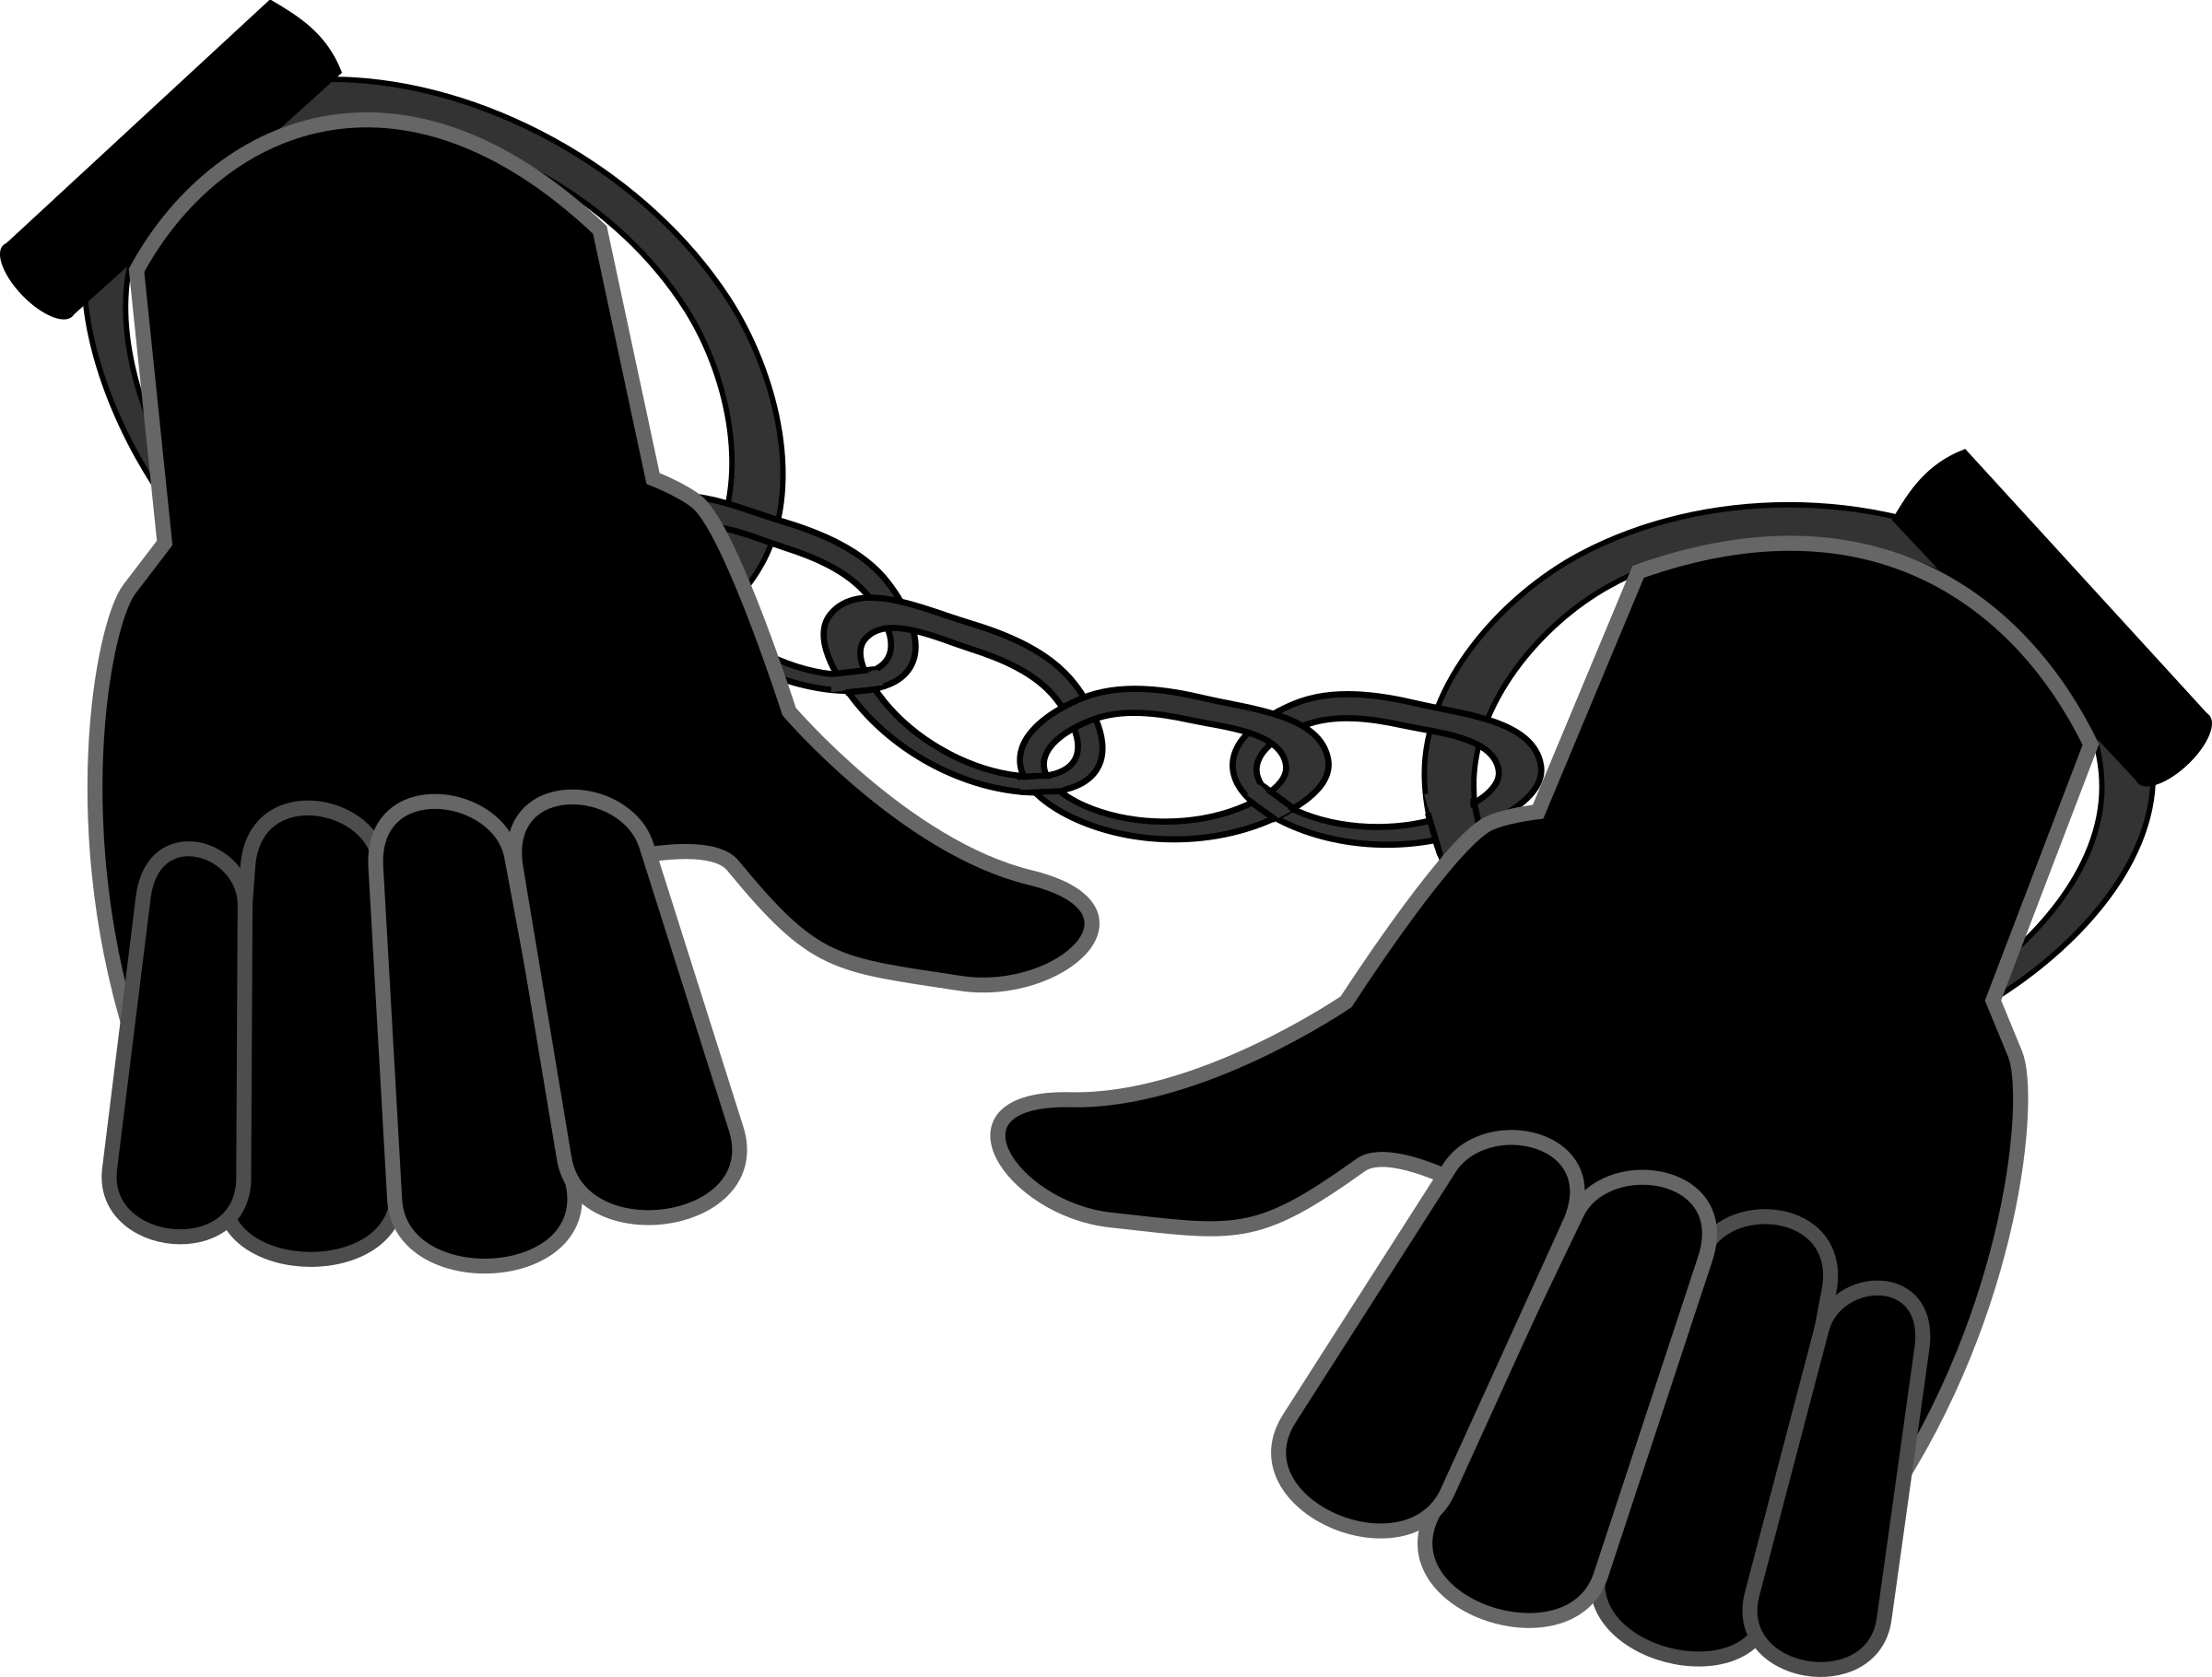 Handshake clipart holding hands. Cuffed png transparent images